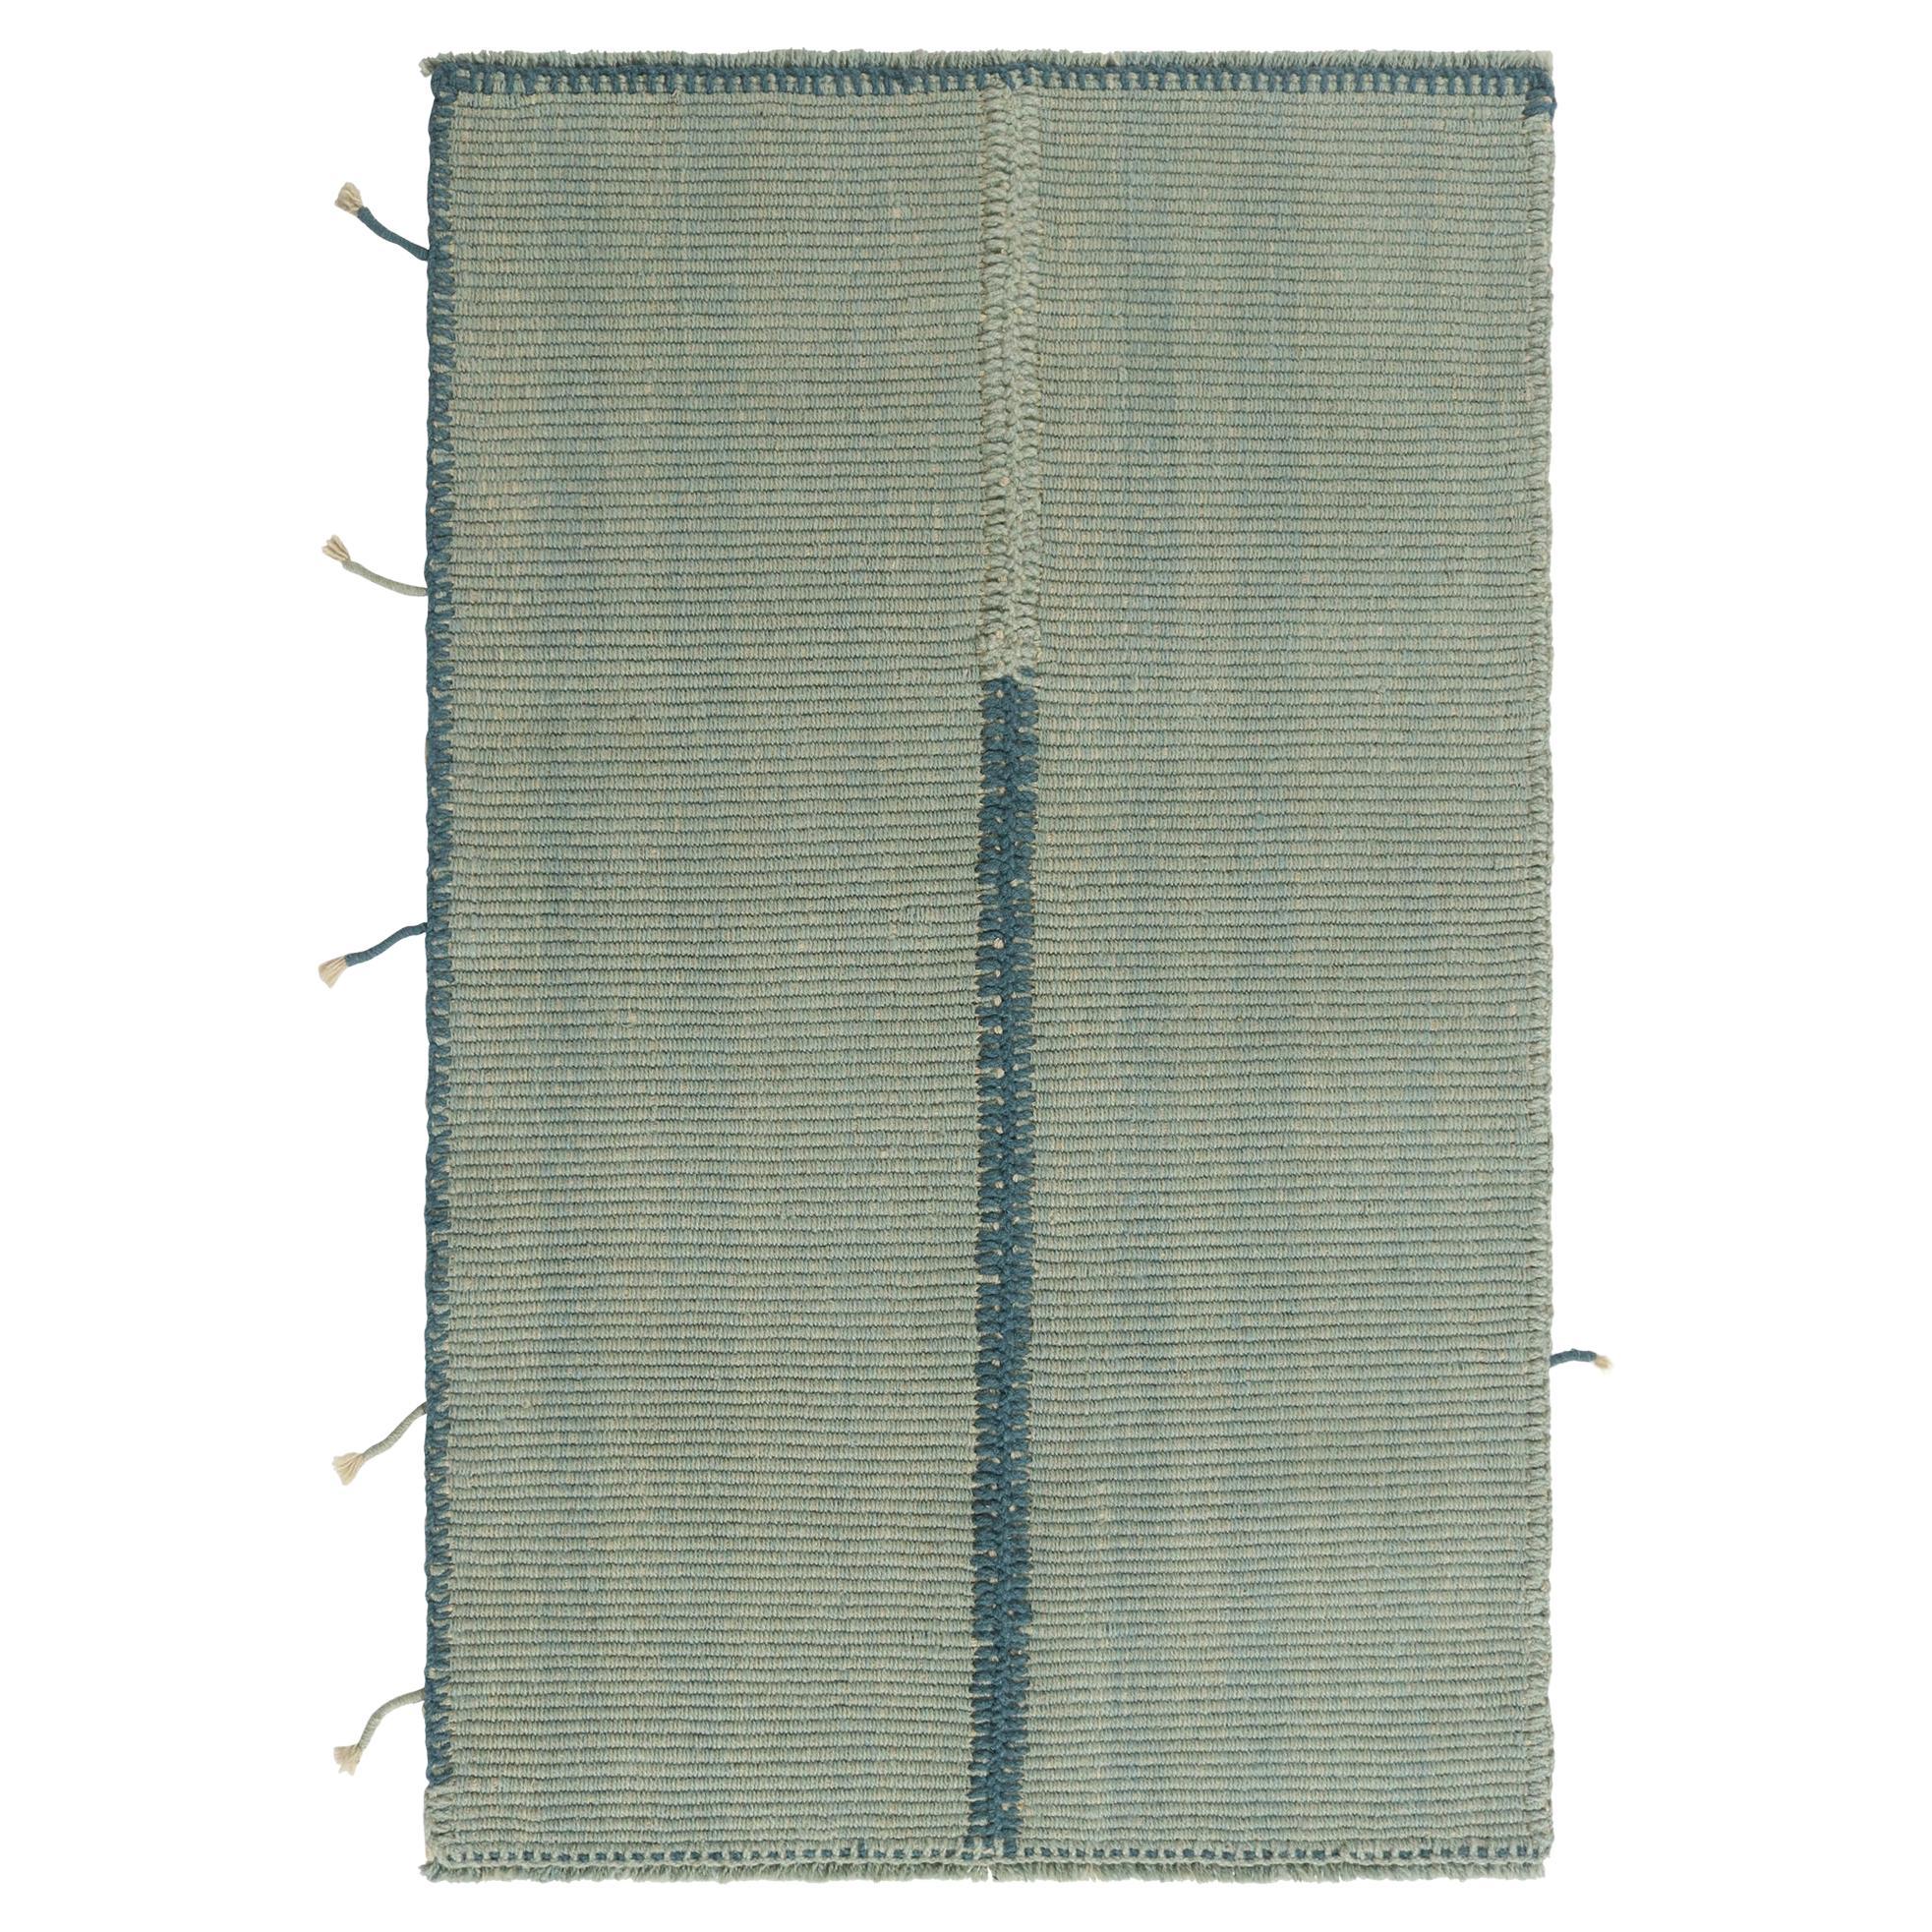 Rug & Kilim’s Contemporary Kilim in Seafoam with Blue Accents For Sale